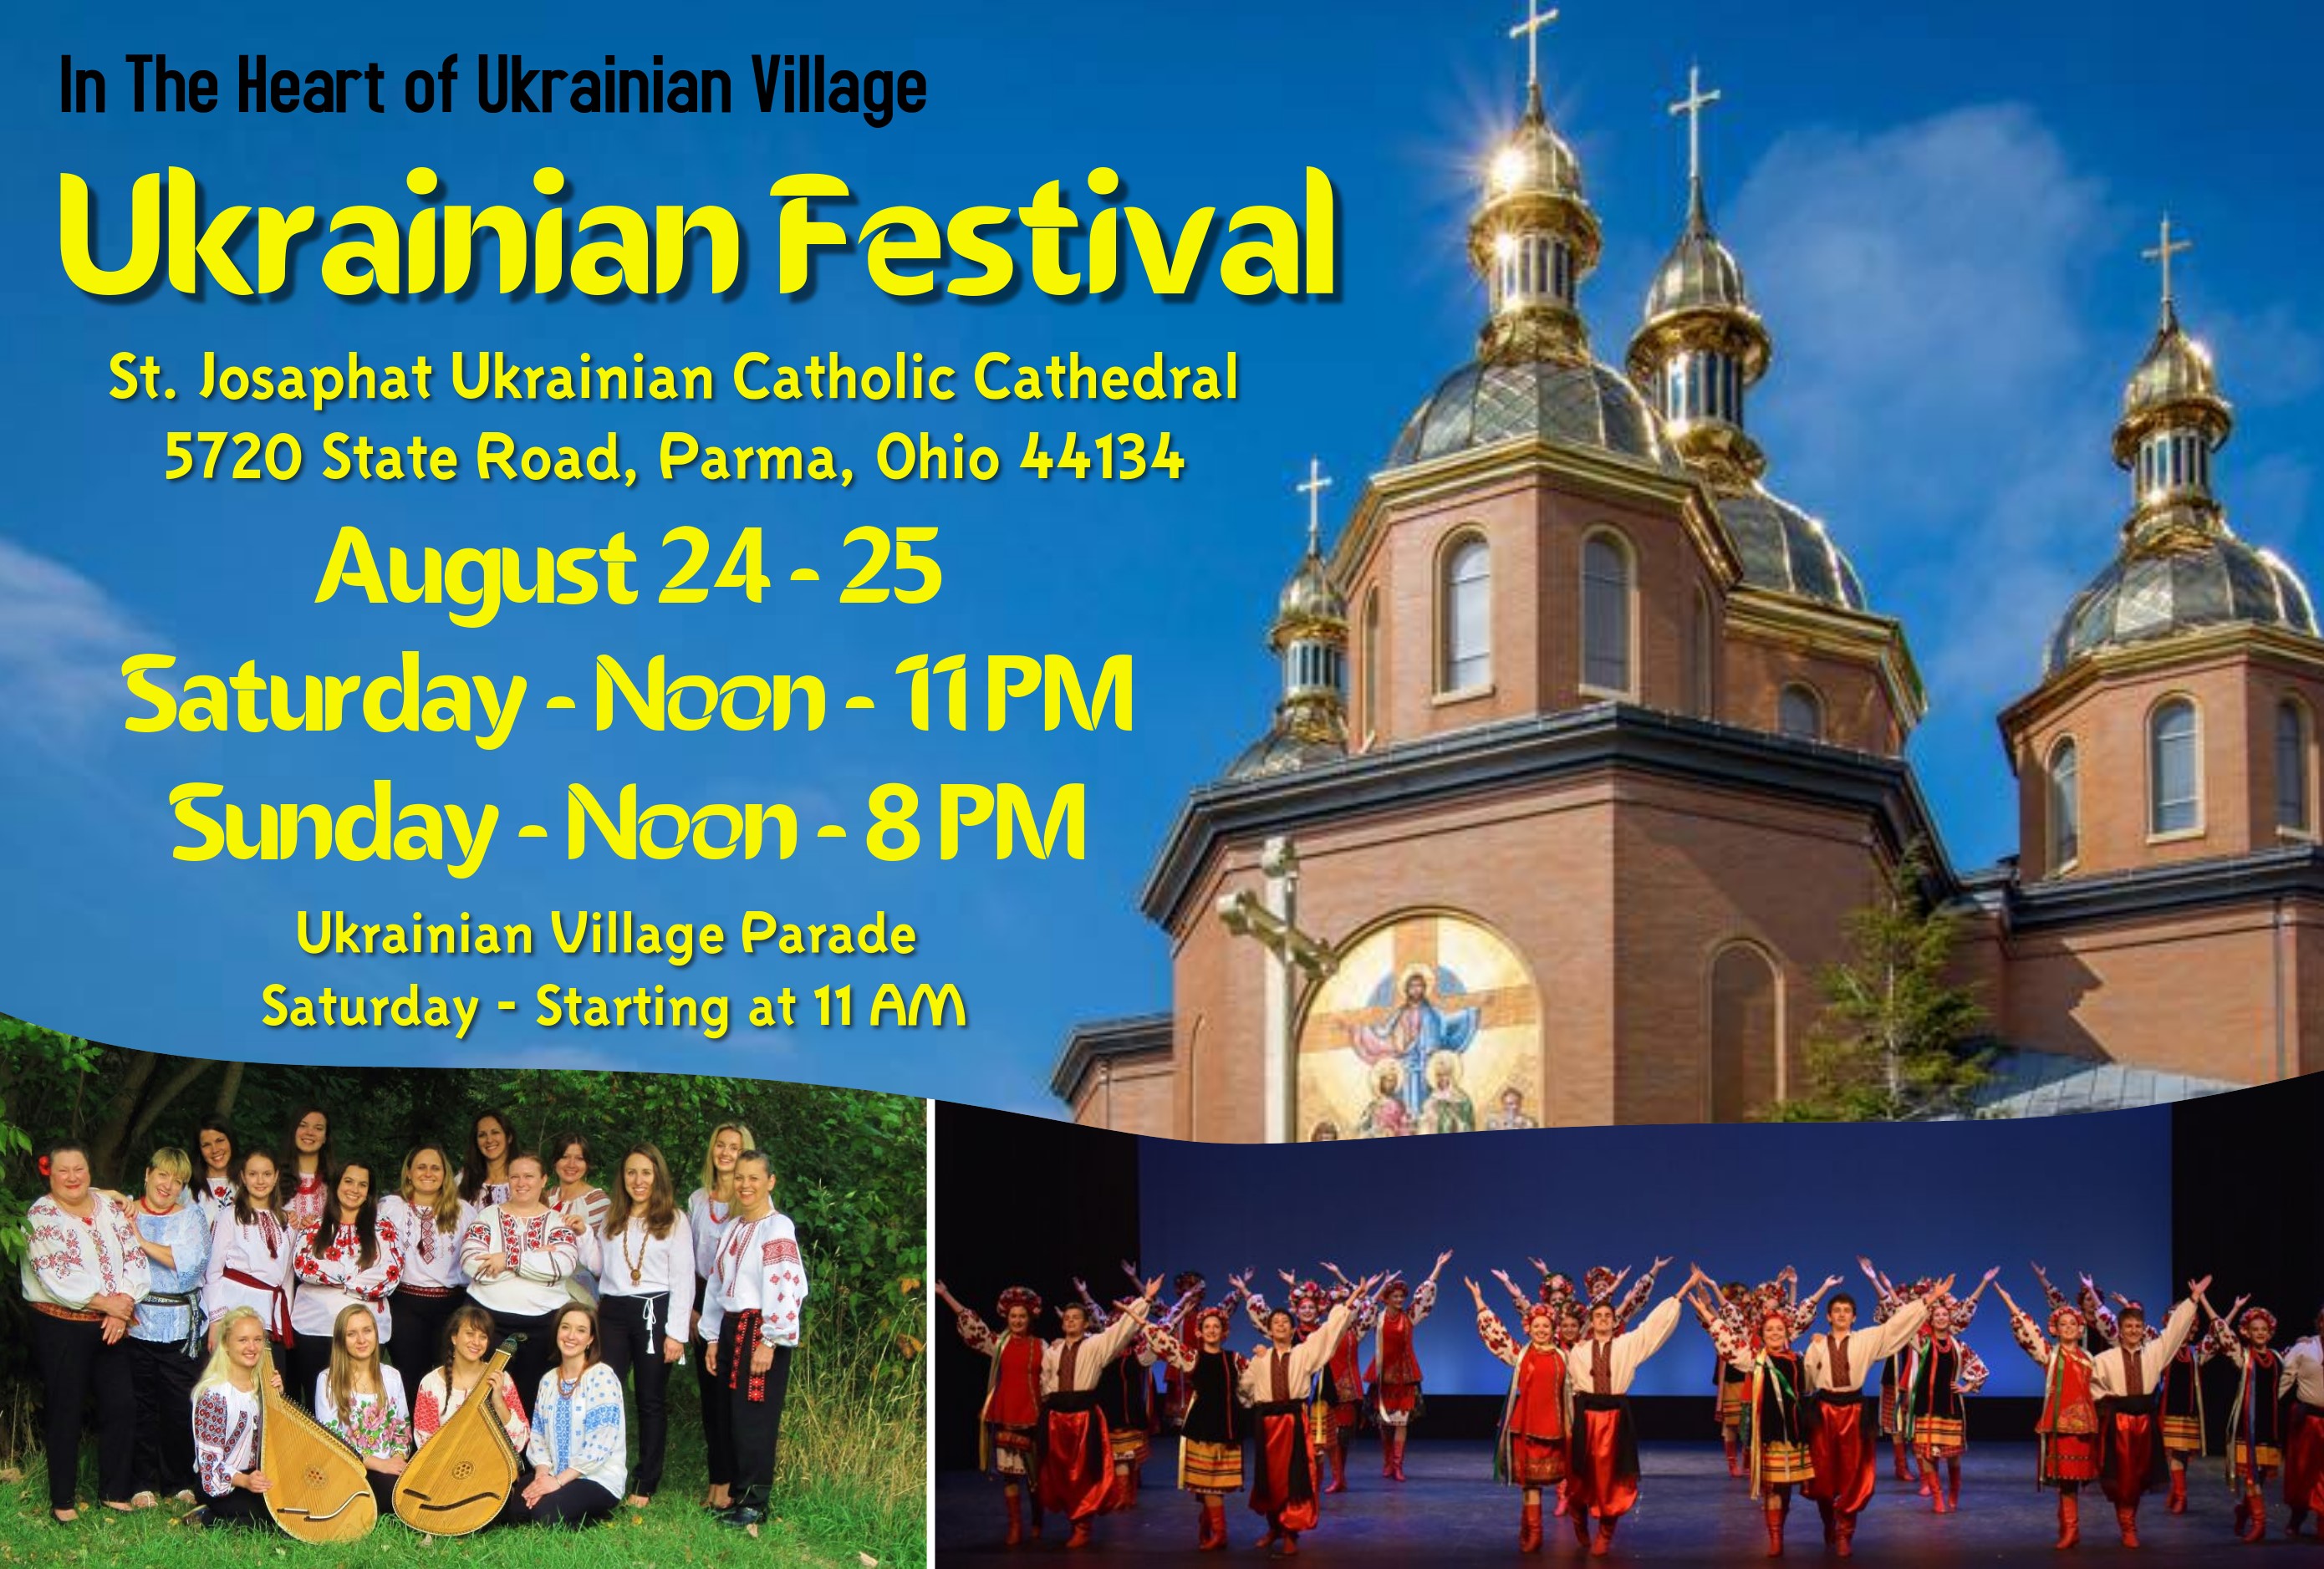 Ukrainian Festival at St Josaphat Cathedral, August 2425, 2019 St